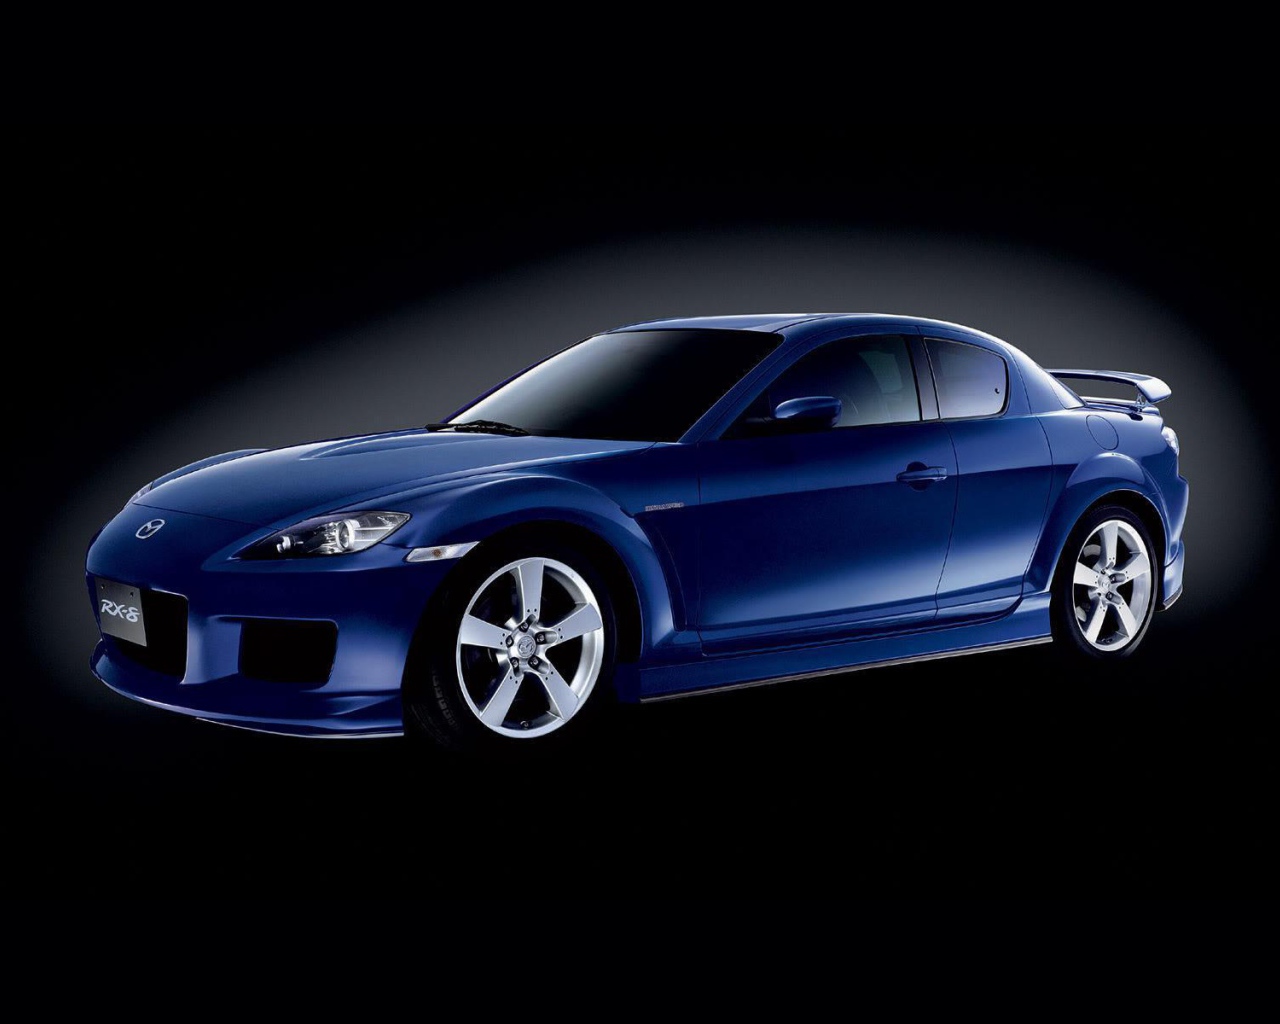 Mazda RX 8 car on the road 